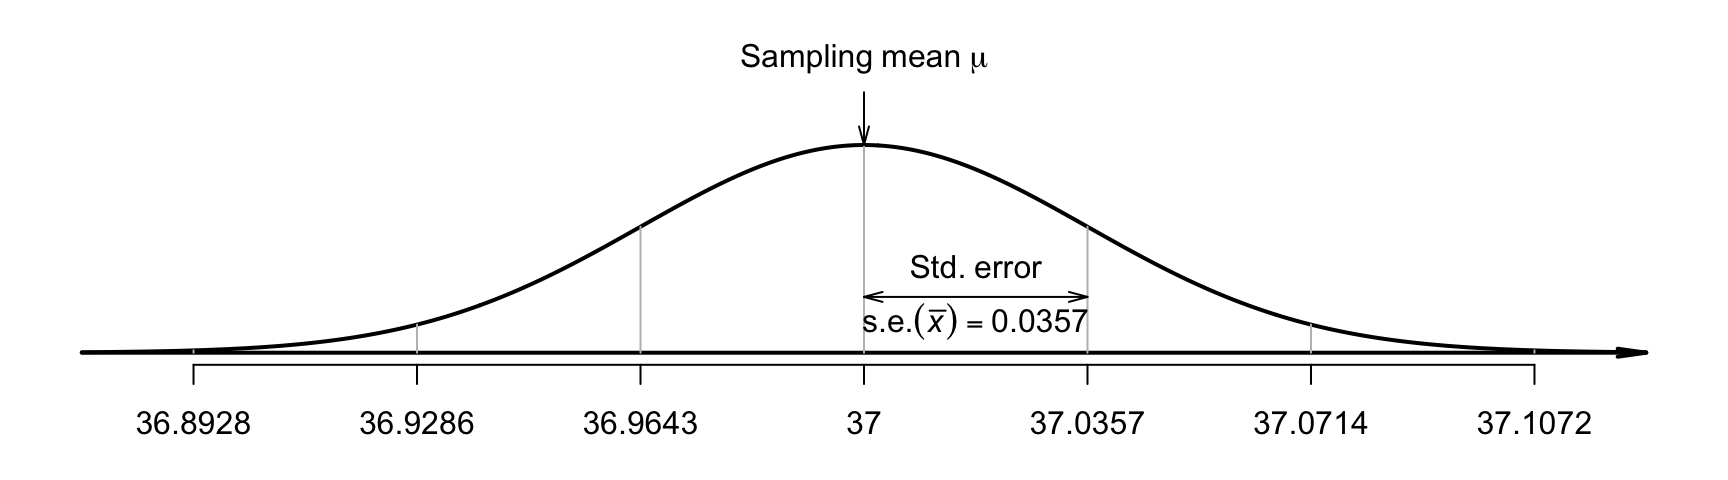 The distribution of sample mean body temperatures, if the population mean is $37.0^\circ$C and $n = 130$. The grey vertical lines are $1$, $2$ and $3$ standard deviations from the mean.